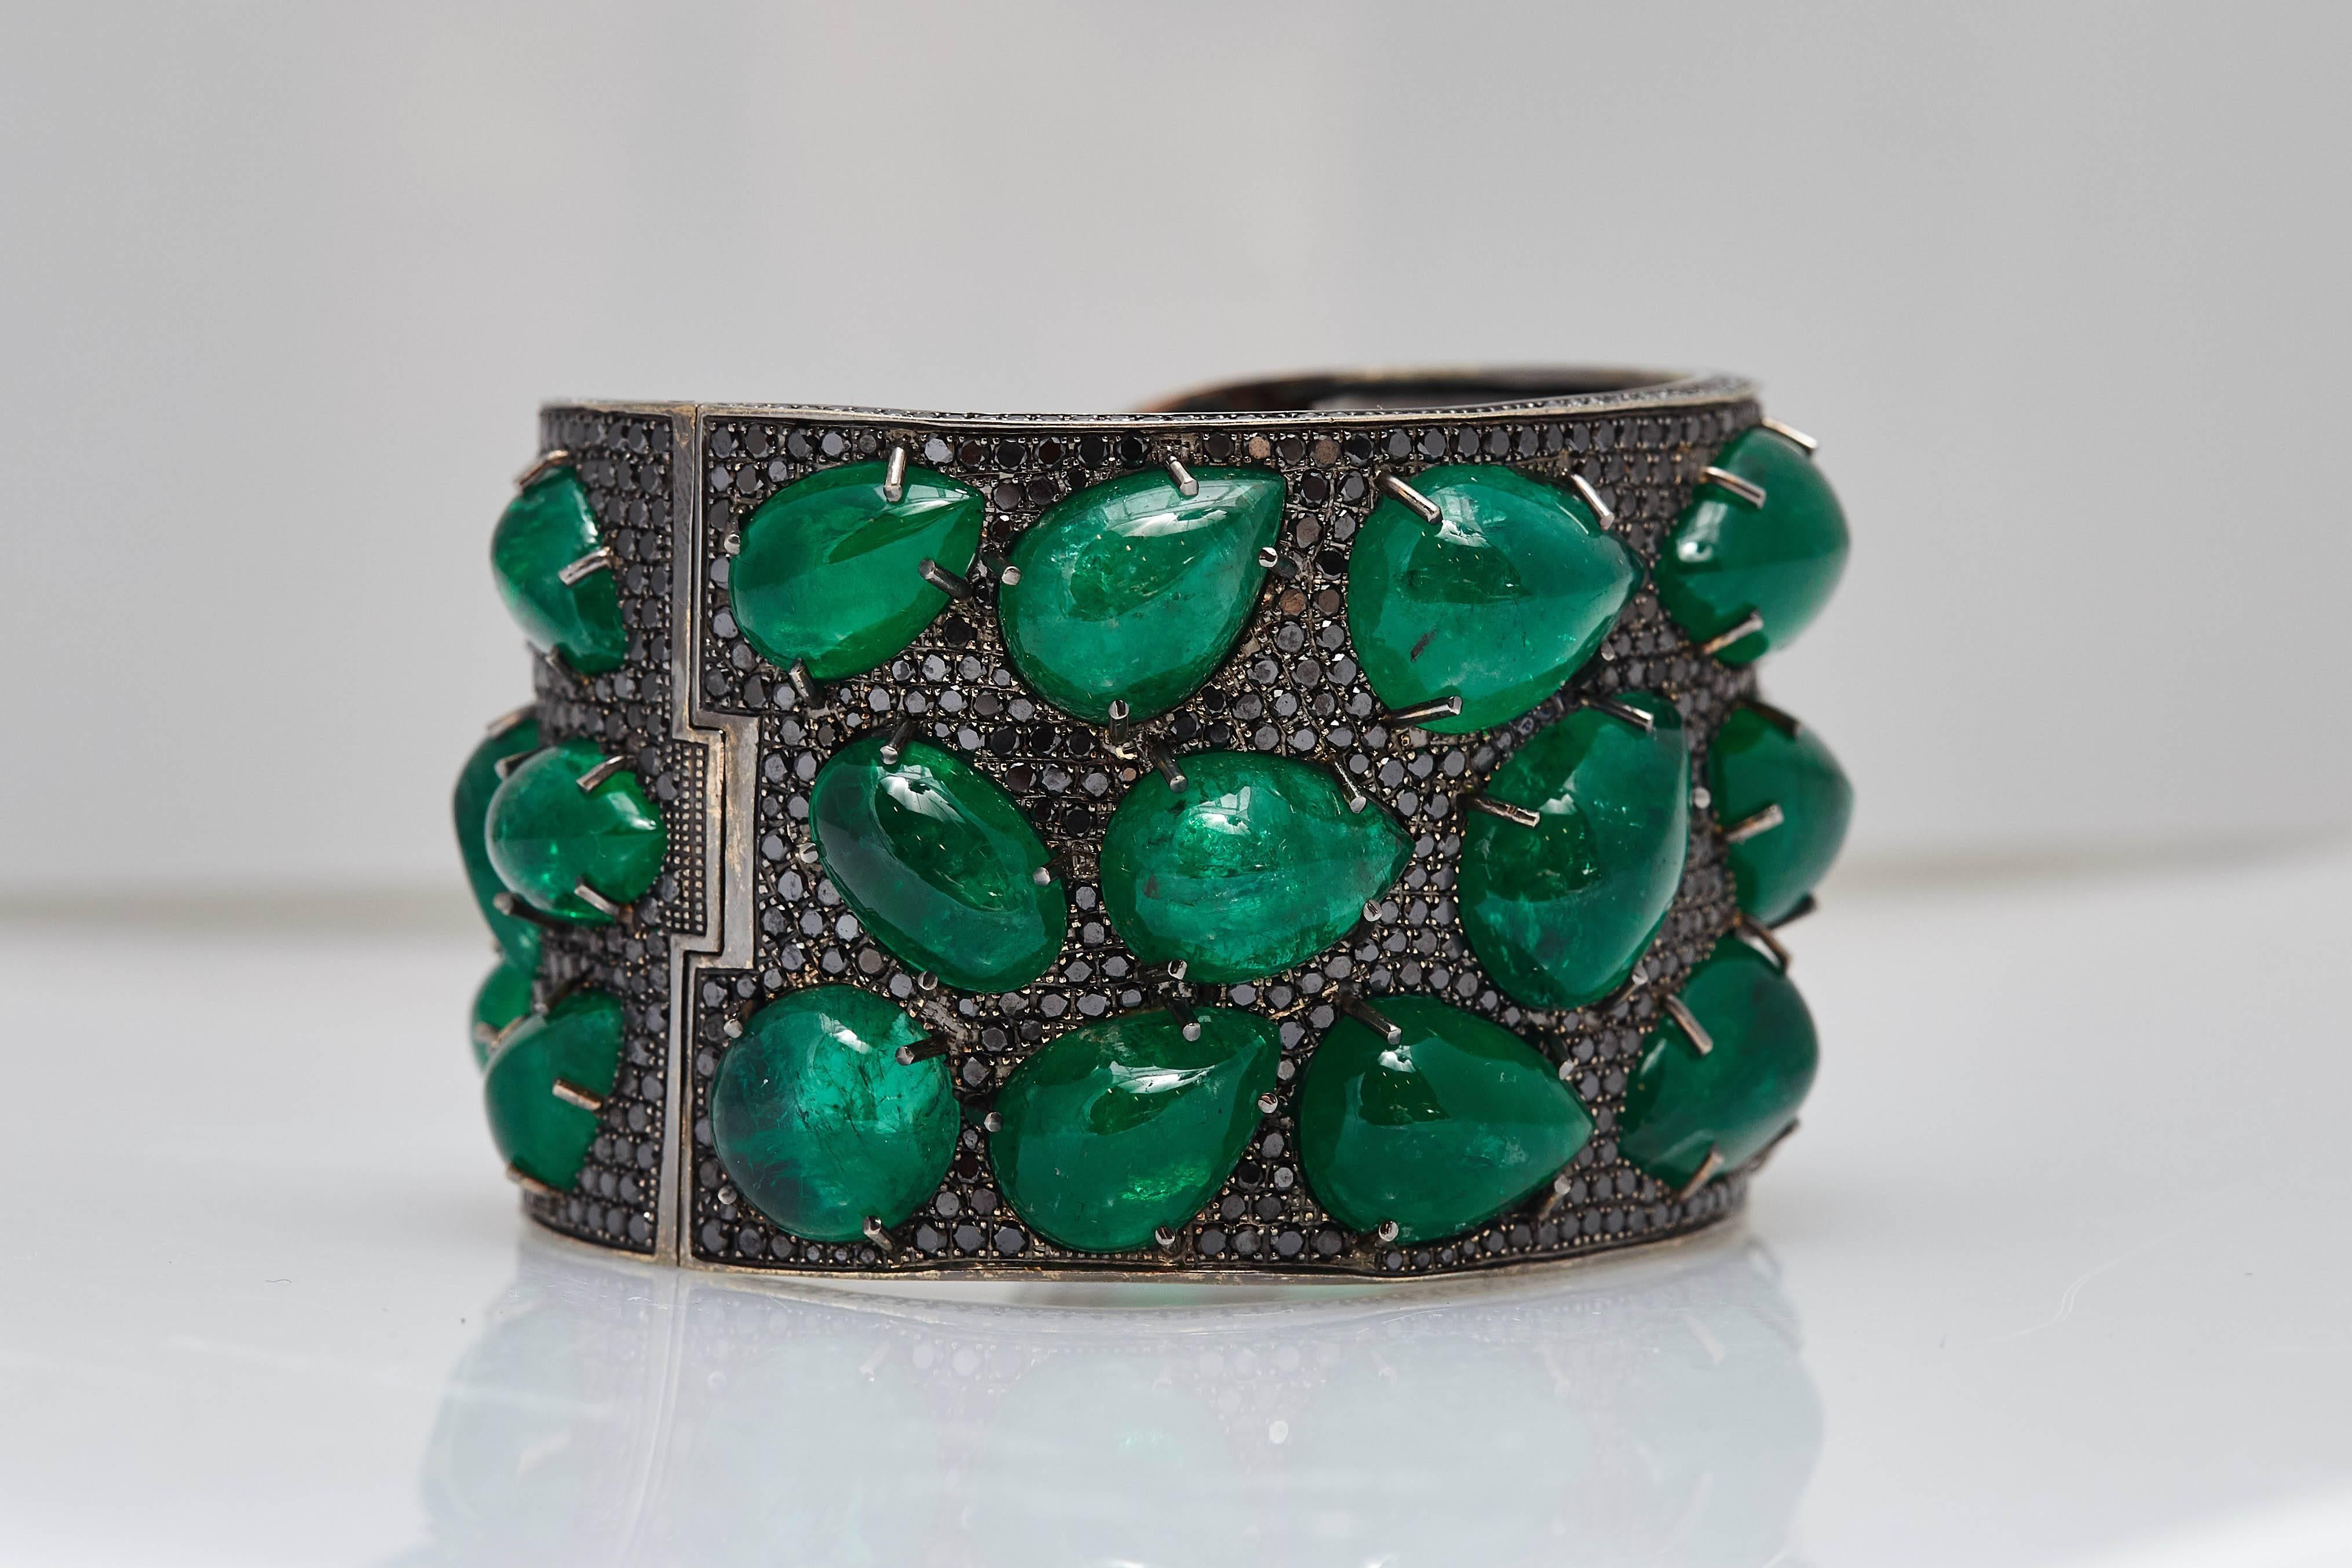 An impressive cuff bracelet in 18kt black gold with 31 cabochon emeralds (app. 180 cts) and black diamonds (app. 15.65 cts). Made in Italy, circa 1980
